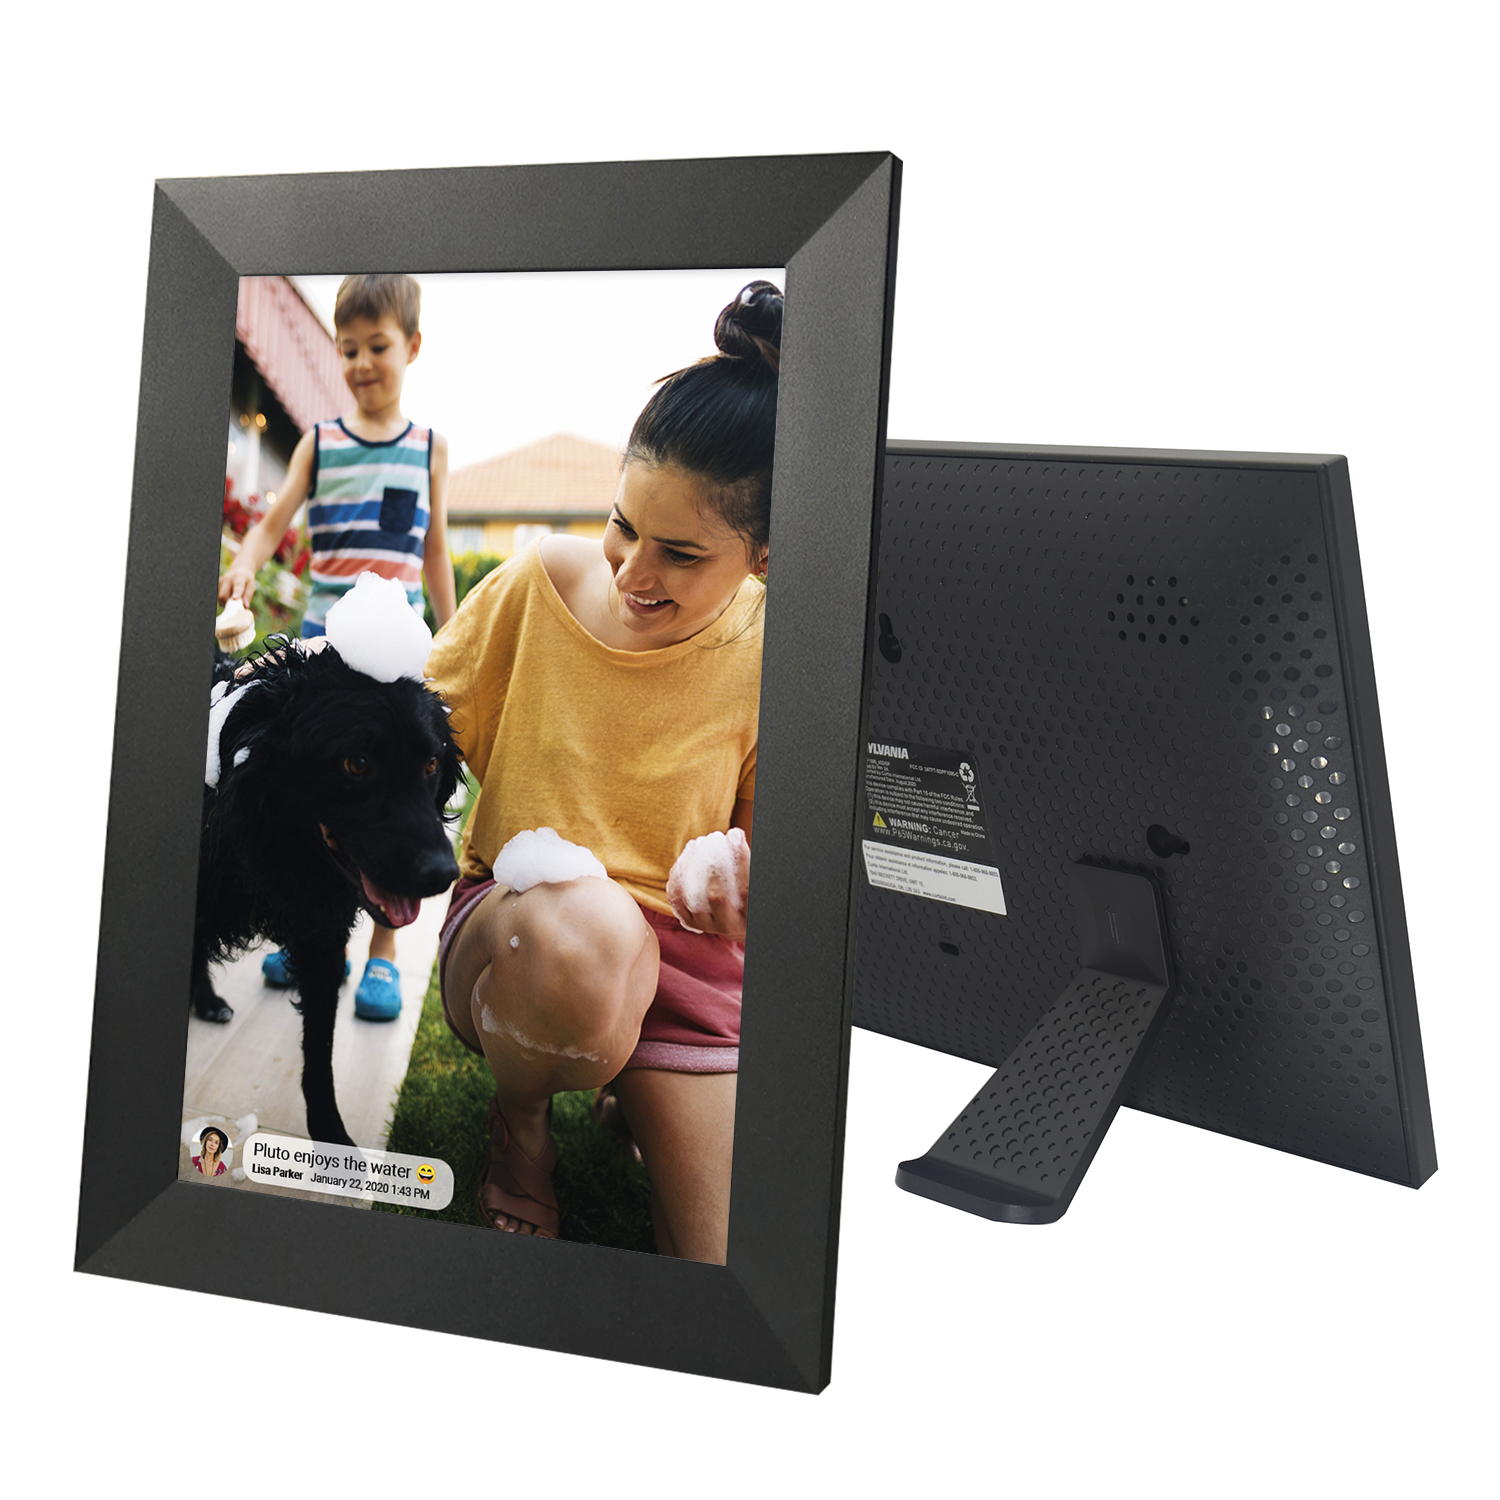 Sylvania, 10 in. Wi-Fi Frameo APP Control Digital Cloud Picture Frame, SDPF1096 - image 2 of 9